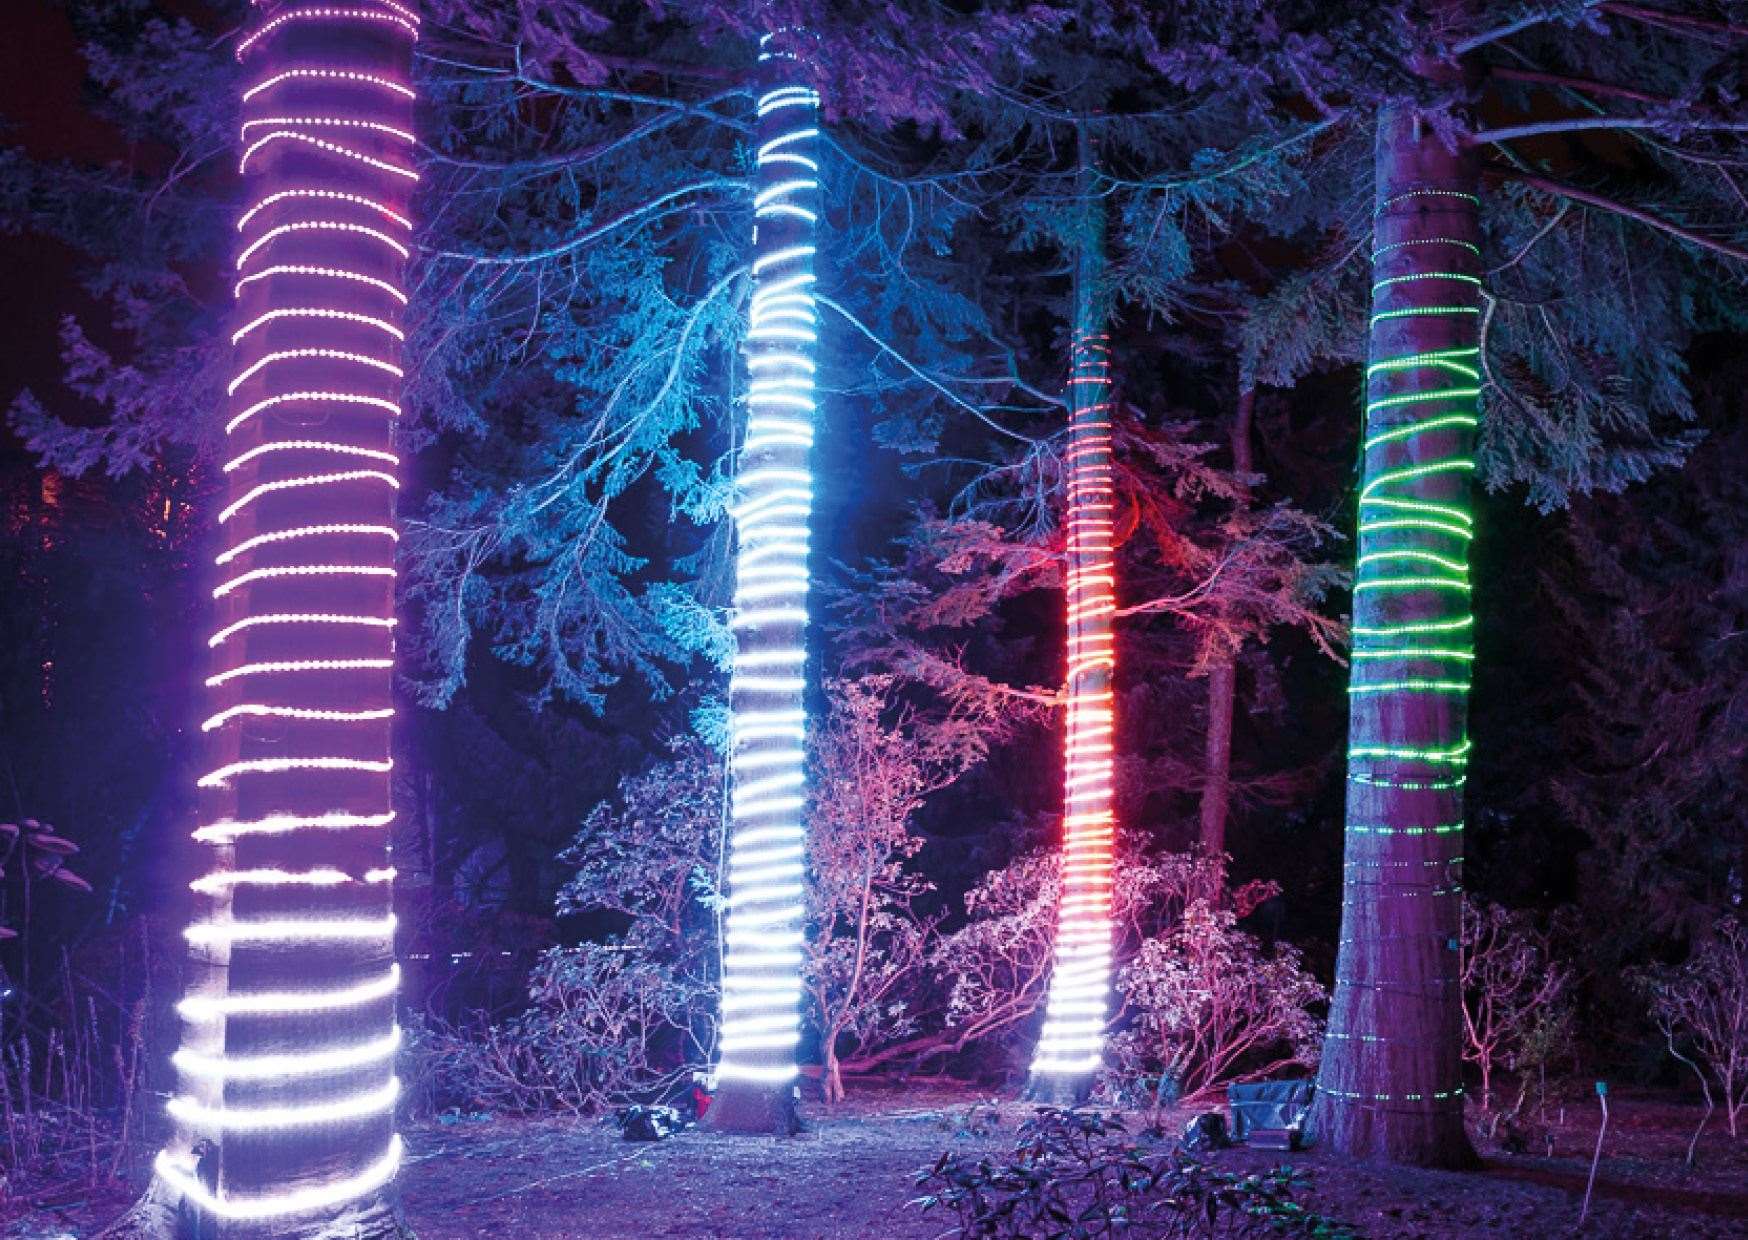 A forest of festive lights will greet visitors